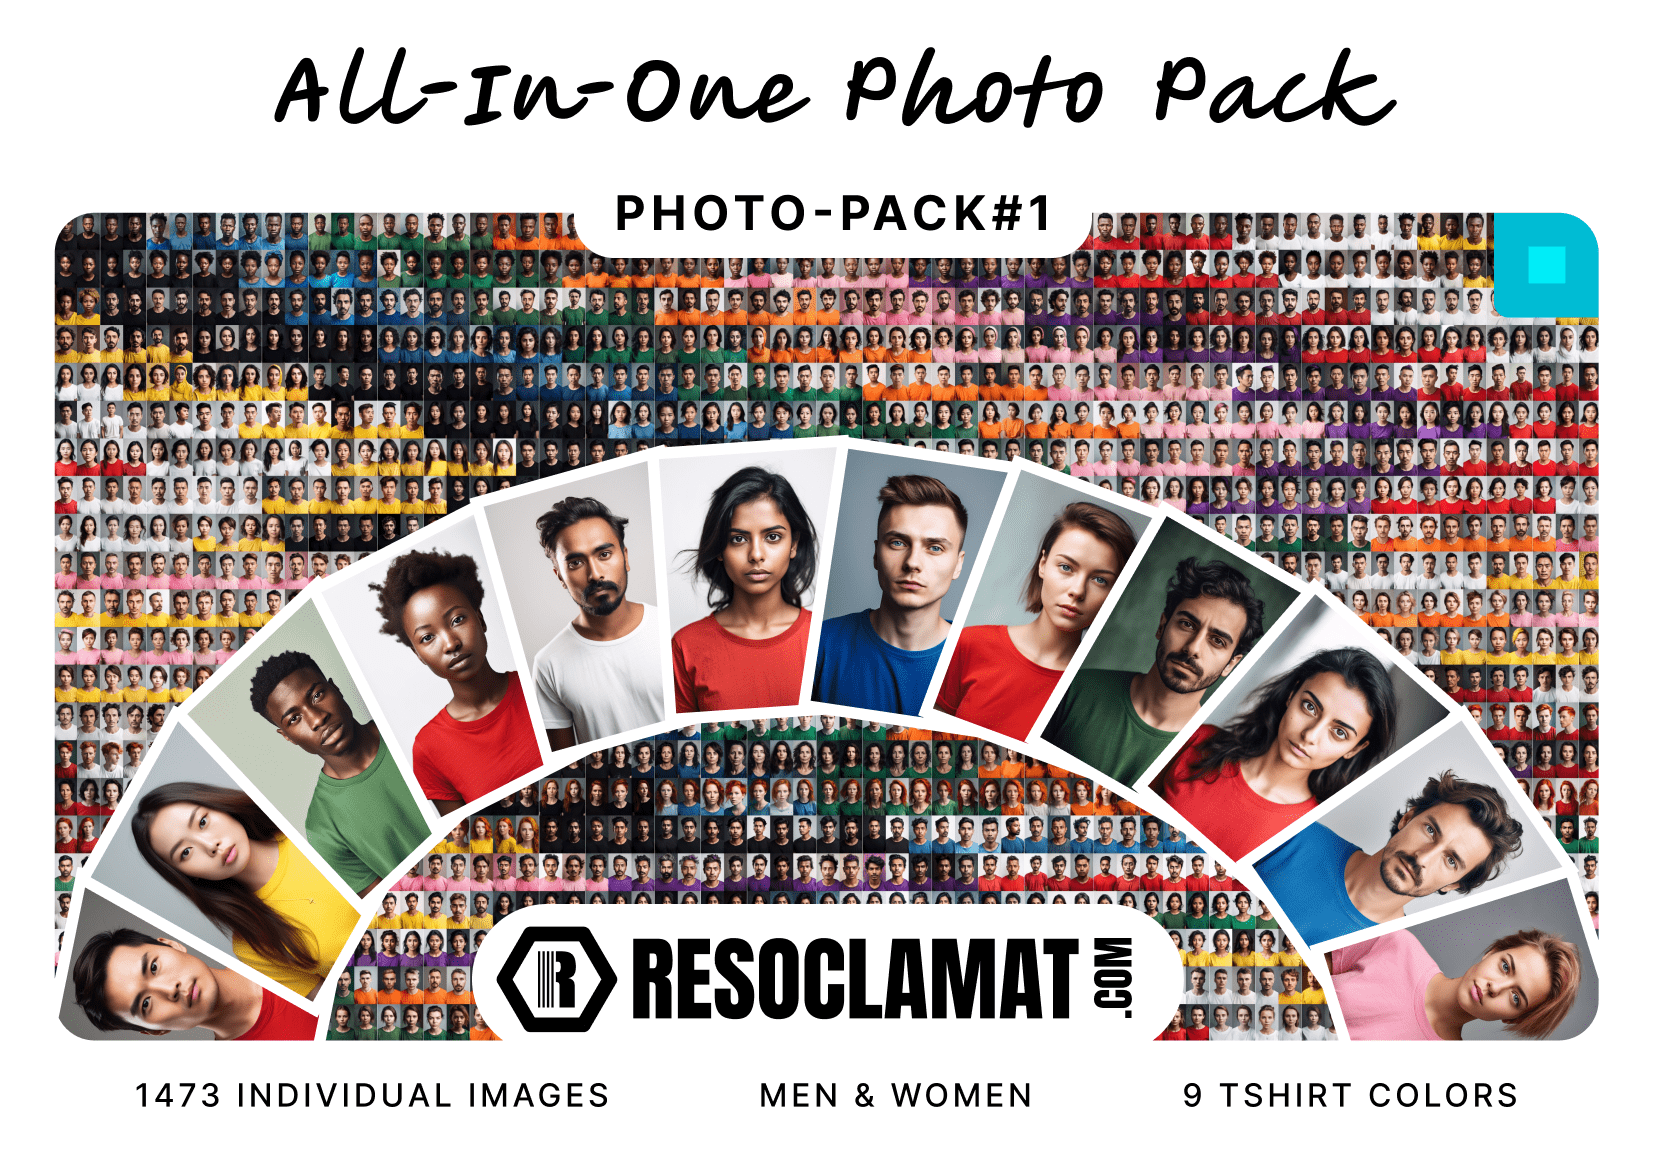 All-In-One Photo Pack 1